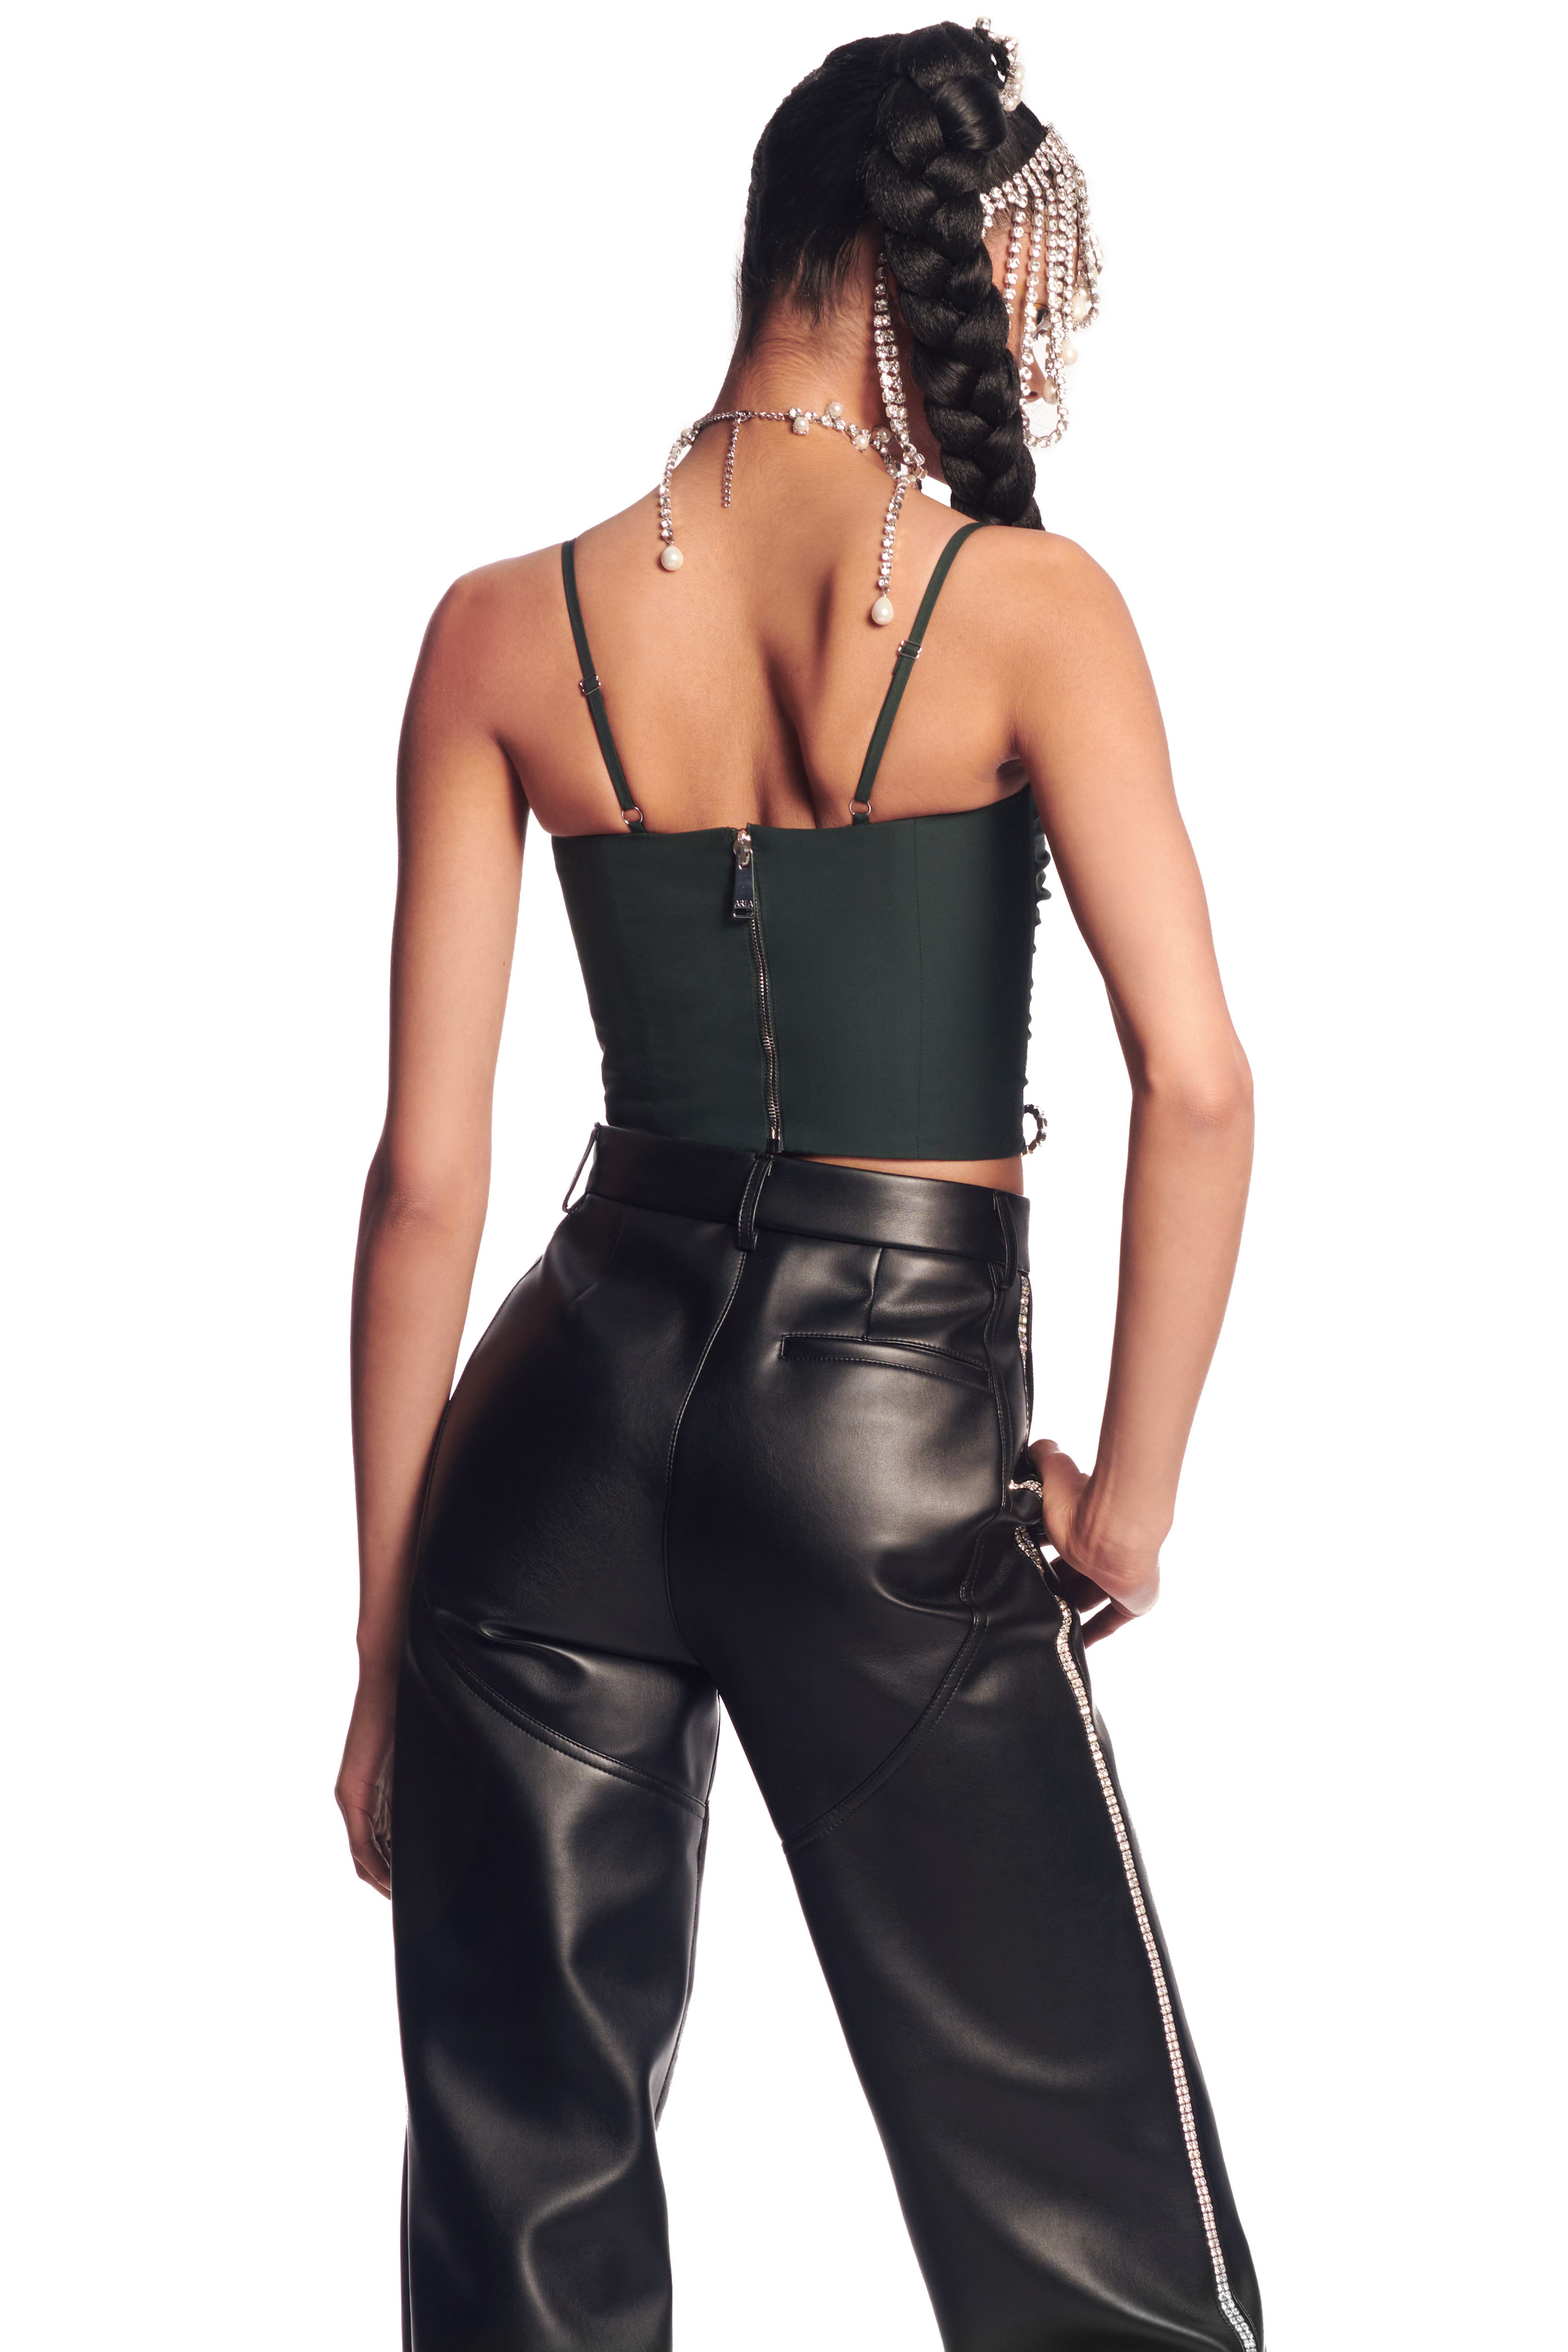 Crystal Bow Ruched Crop Top